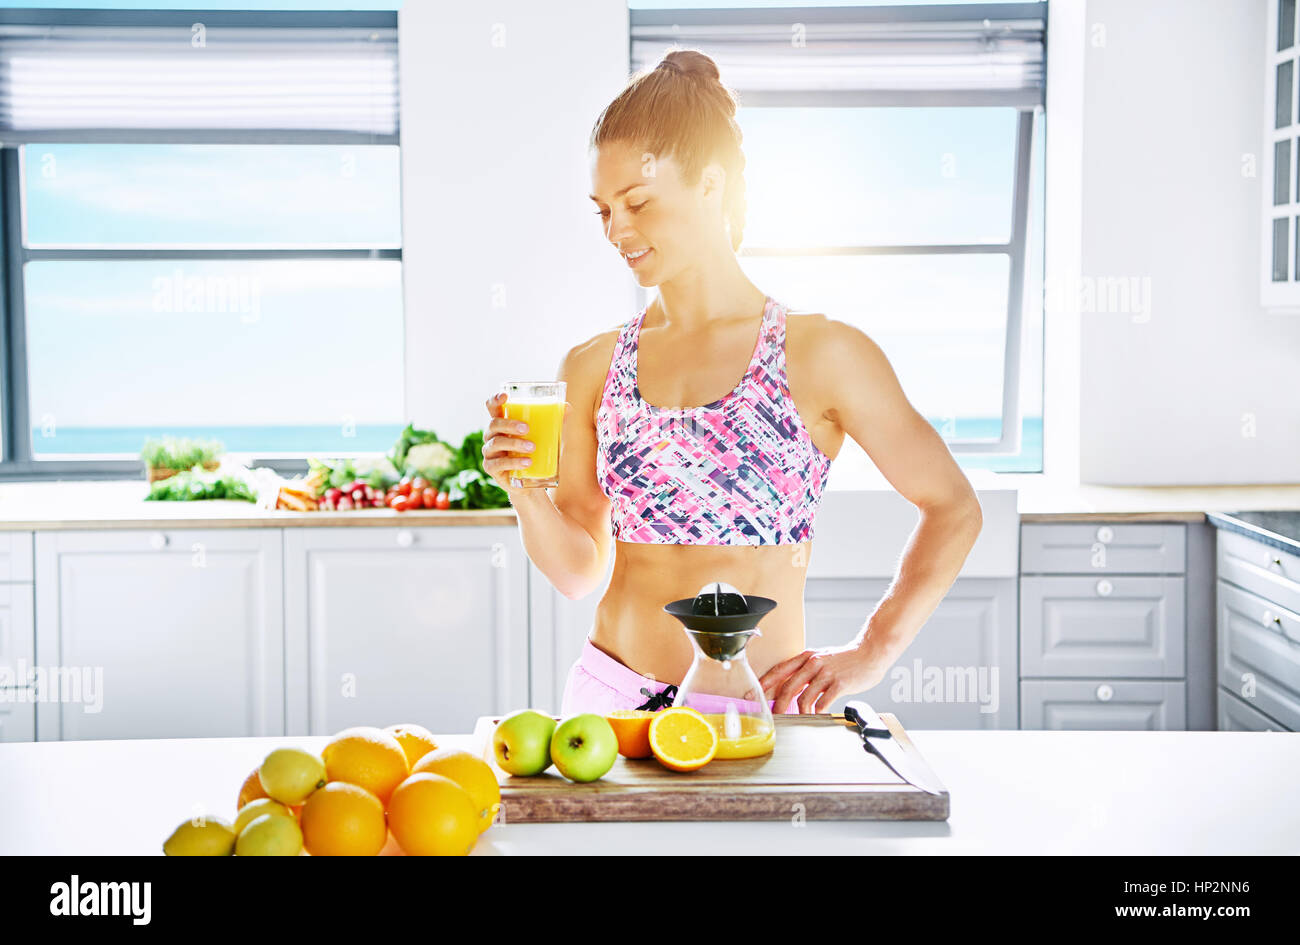 https://c8.alamy.com/comp/HP2NN6/young-healthy-woman-standing-in-sunlight-with-glass-of-orange-juice-HP2NN6.jpg